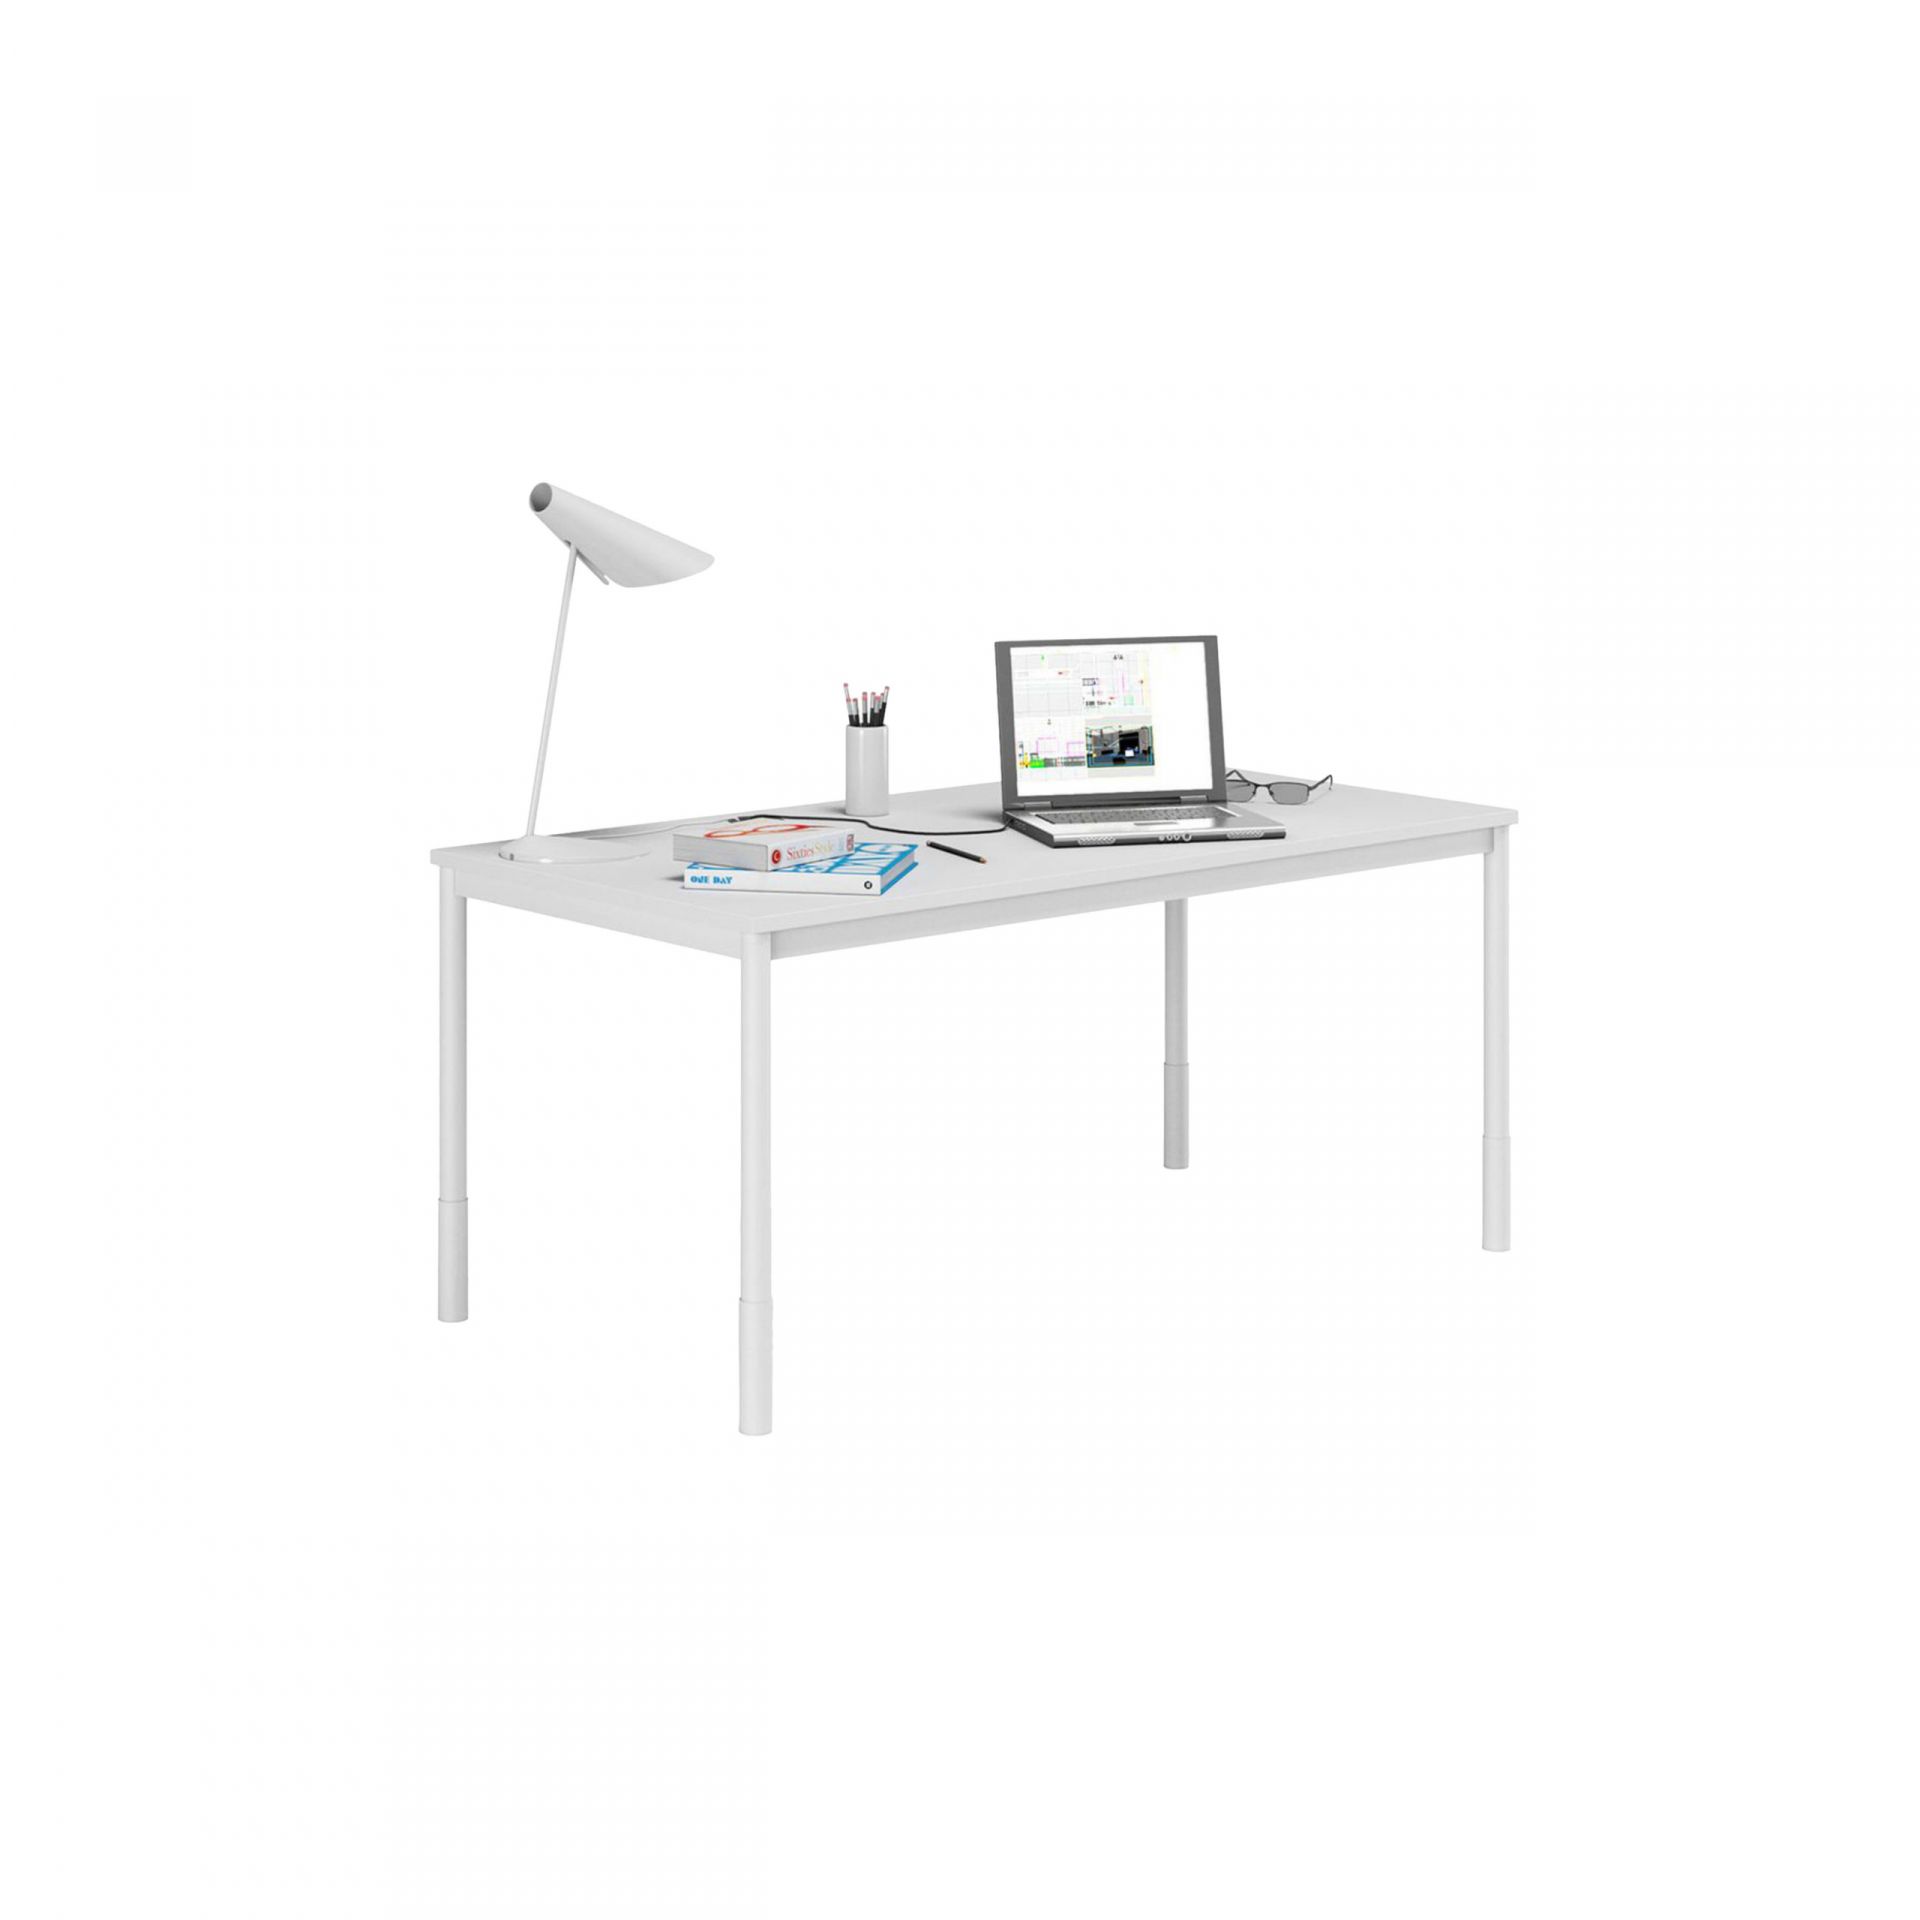 Team Pro Desk/meeting table product image 2